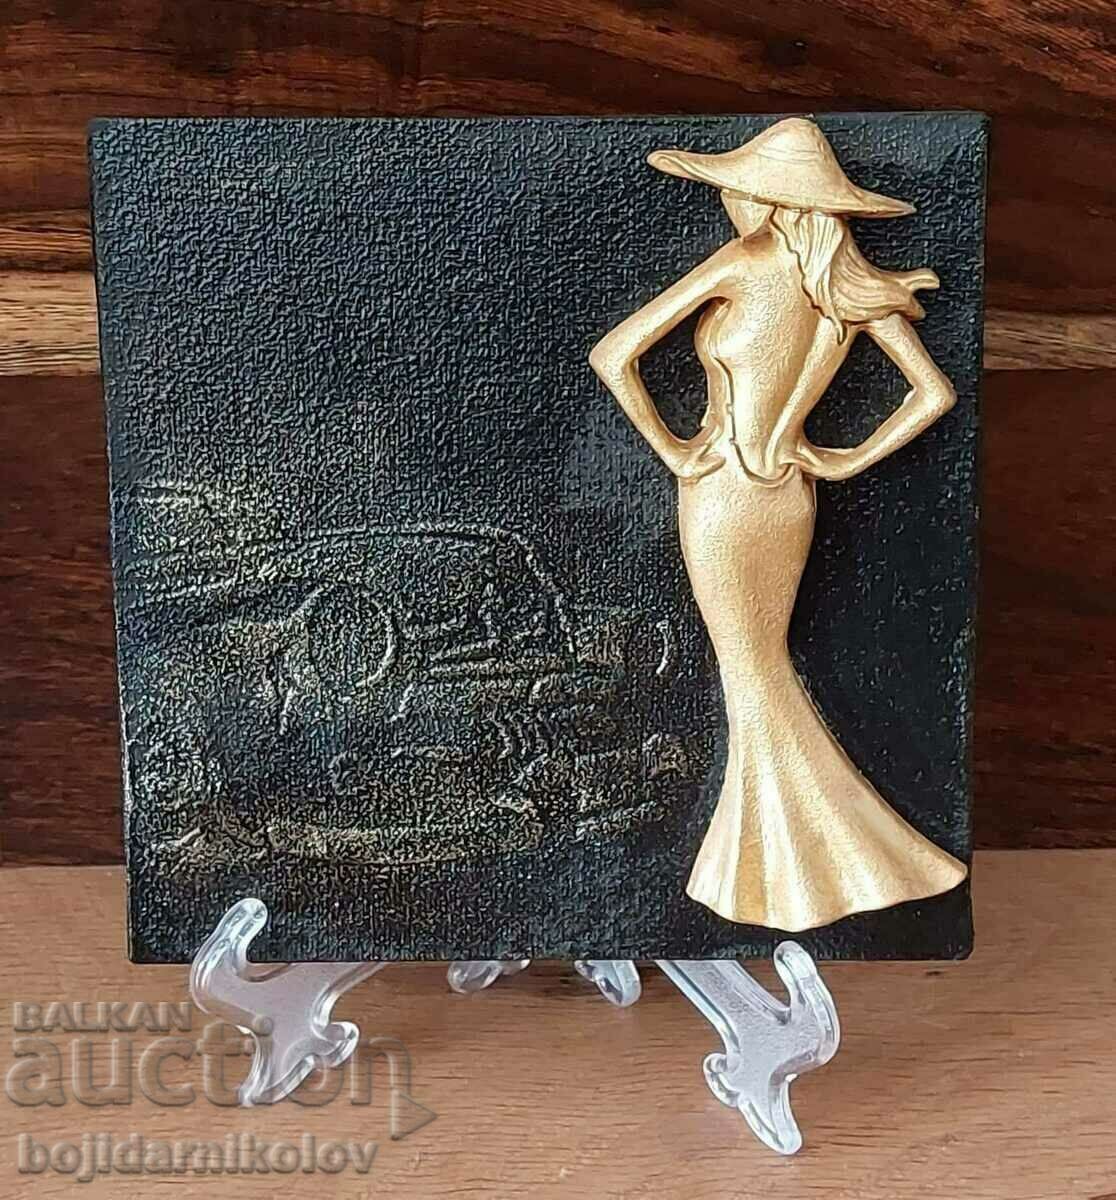 The Lady in Gold, relief, structural painting. Signature